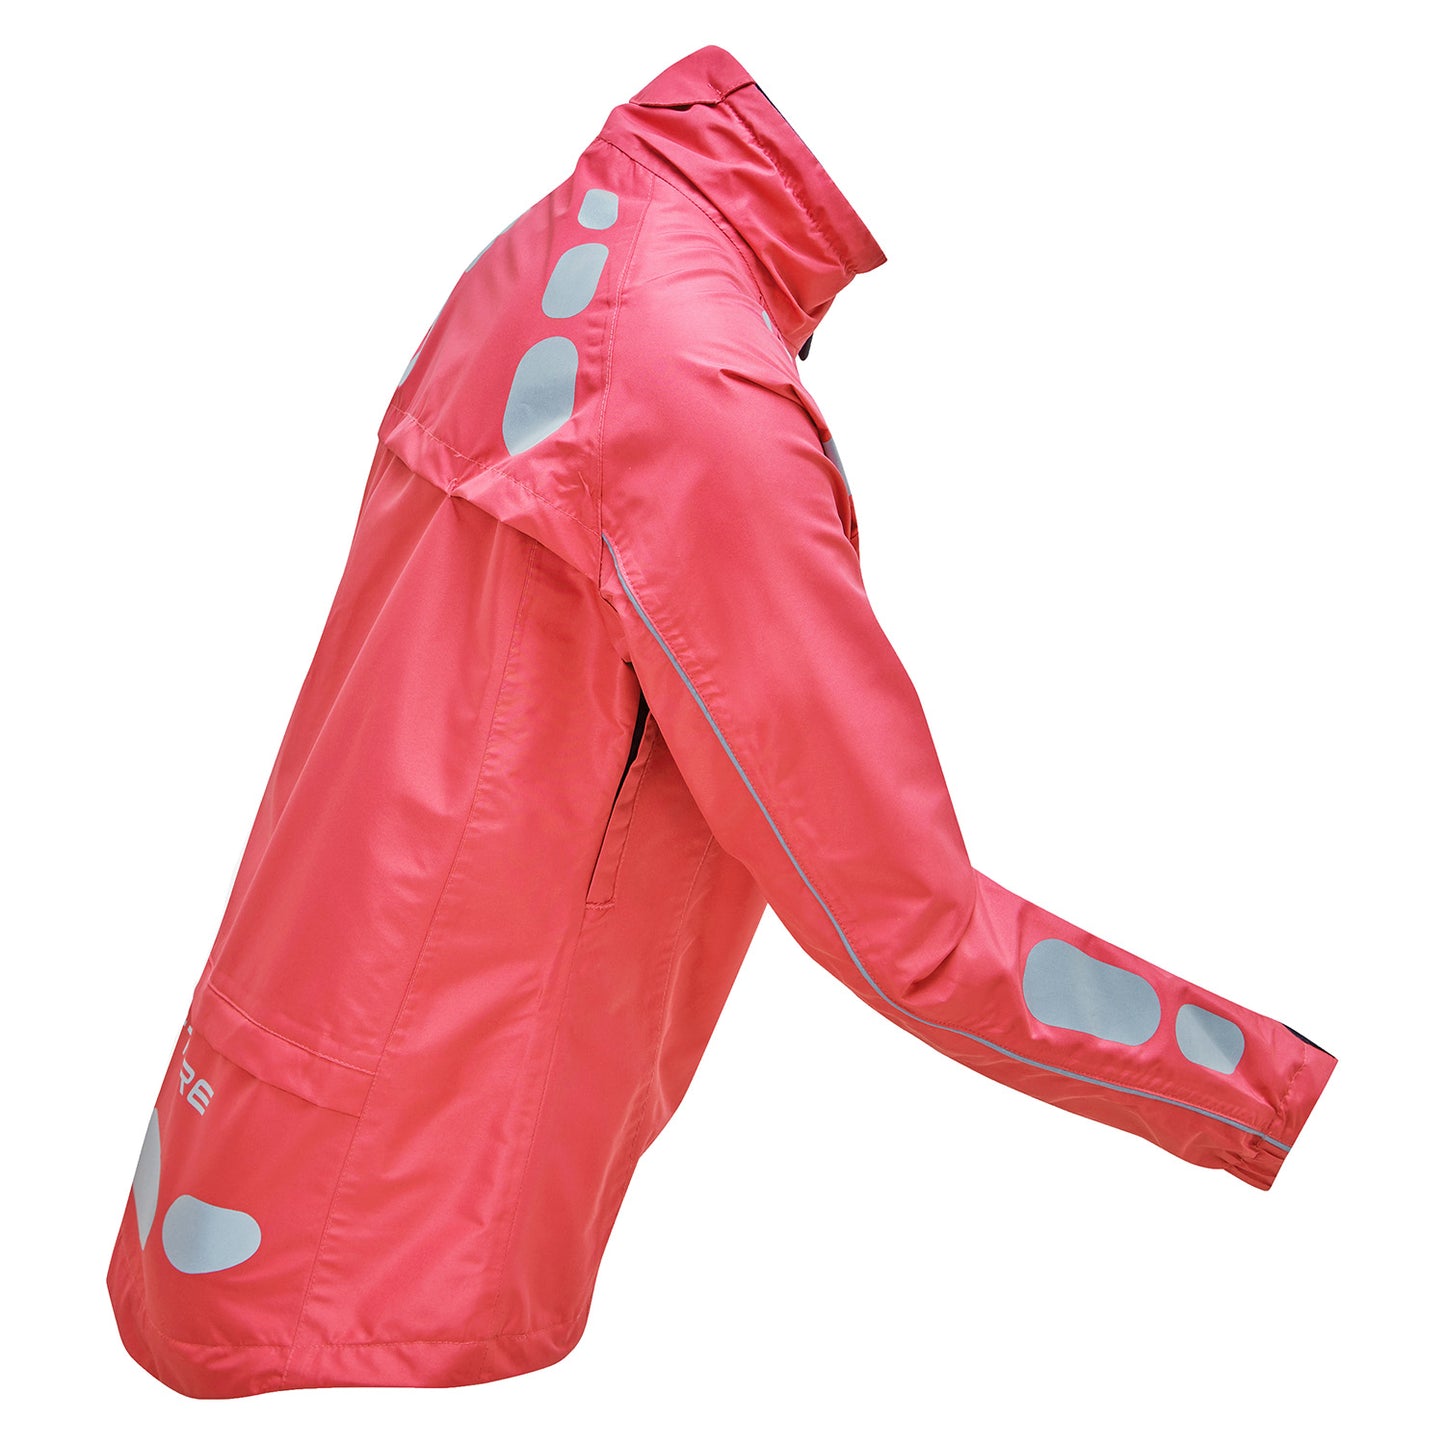 Ettore Night Eagle Ladies Waterproof Breathable High Visibility Pink Cycling Jacket